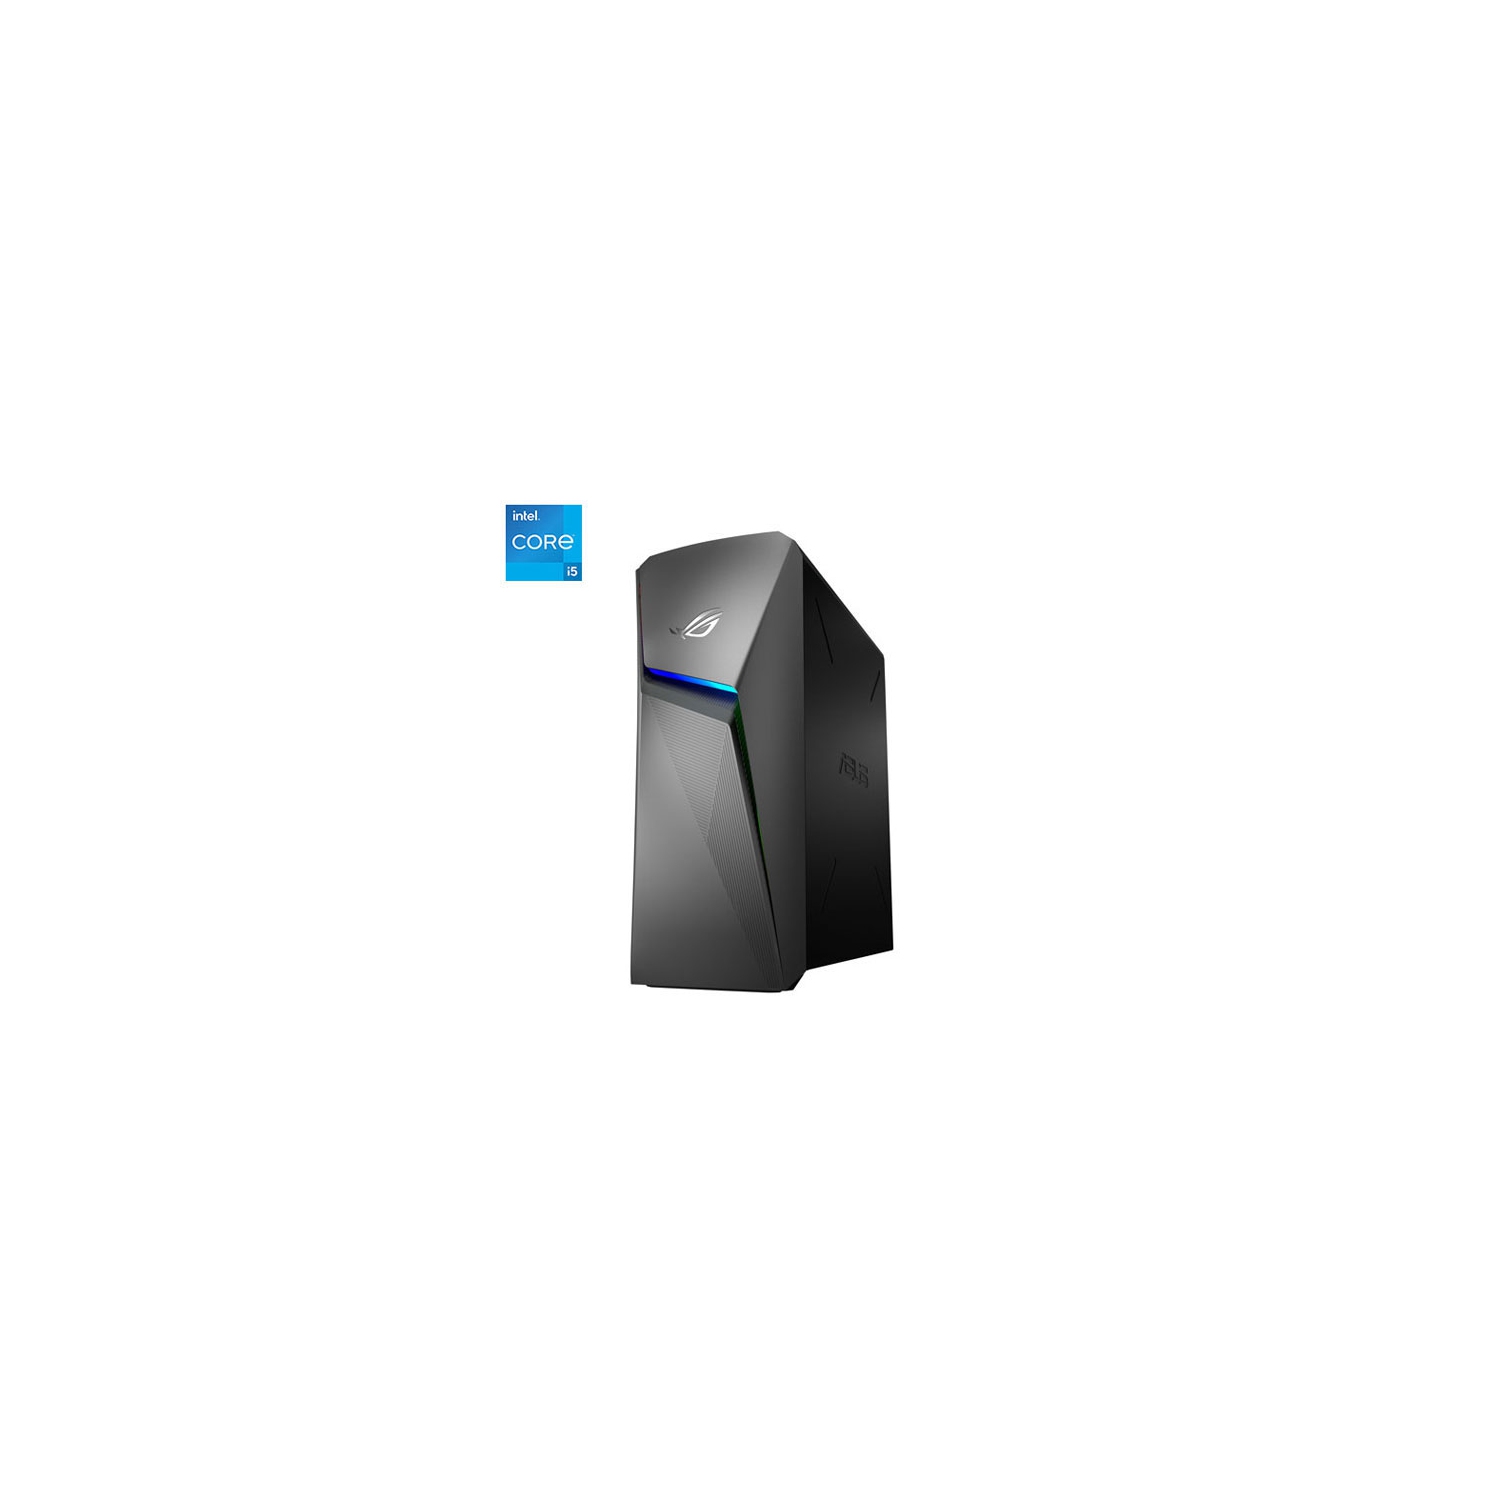 Open Box - ASUS ROG Strix G10 Gaming PC - Grey (Intel Core i5-11400F/512GB SSD/16GB RAM/RTX 3050) - Only at Best Buy